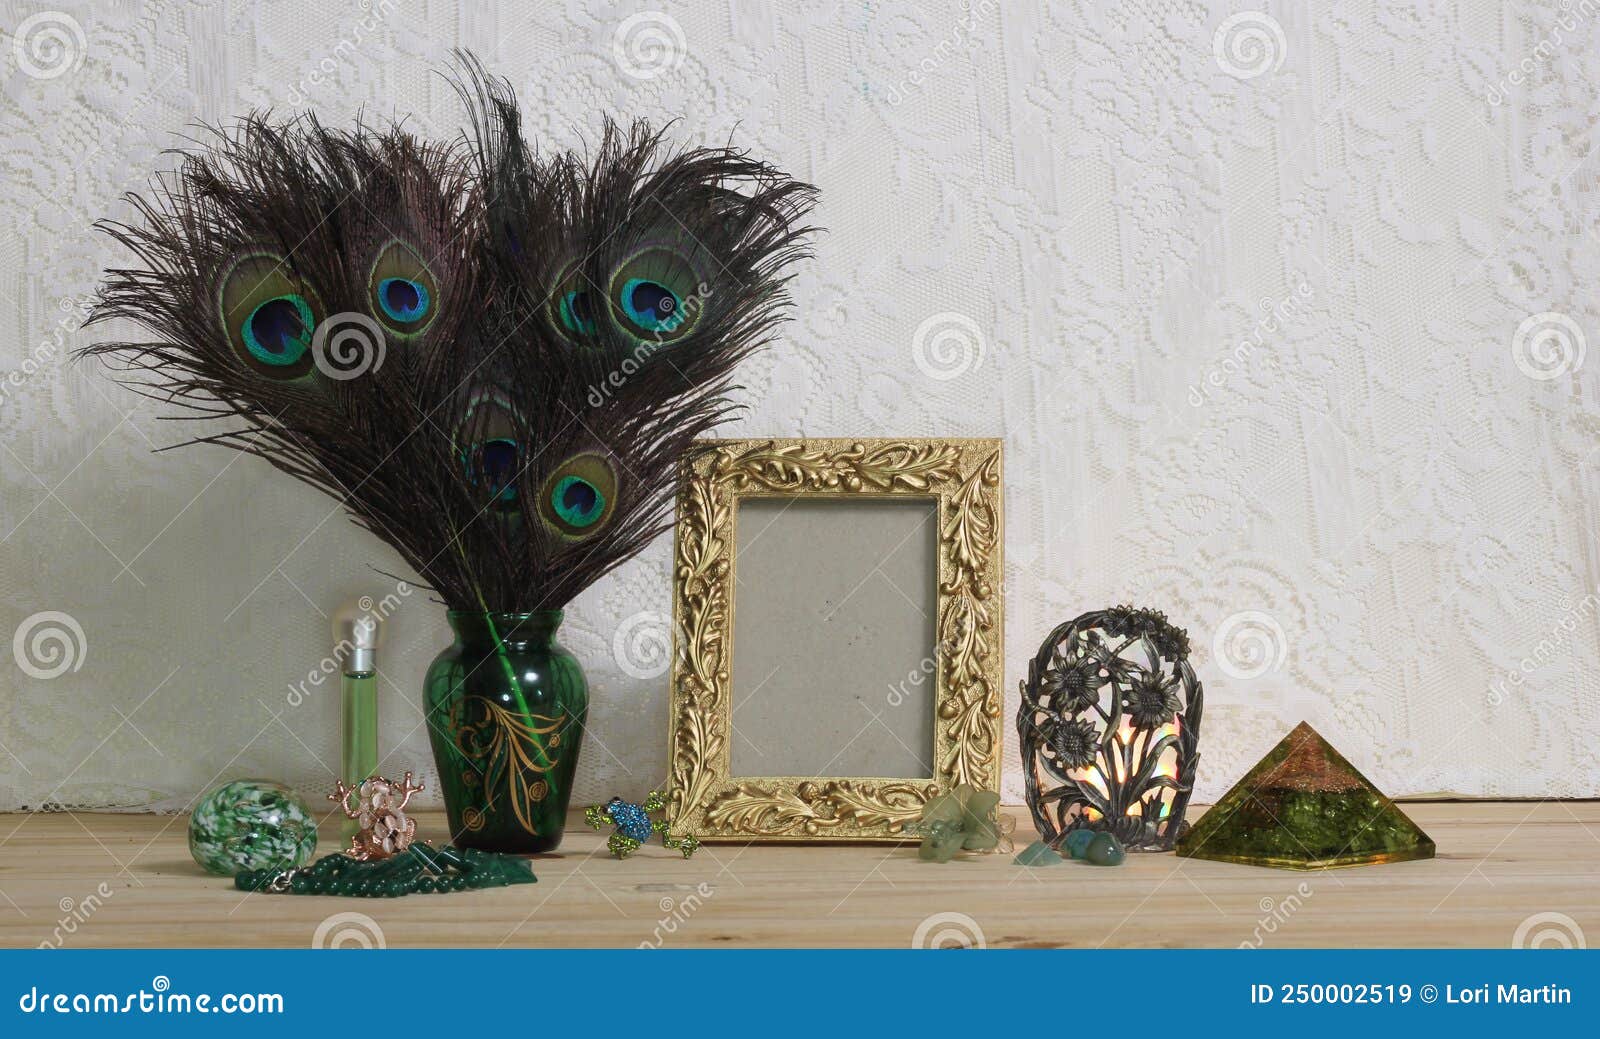 Vase of Peacock Feathers with Green Jewelry and Gold Photo Frame ...